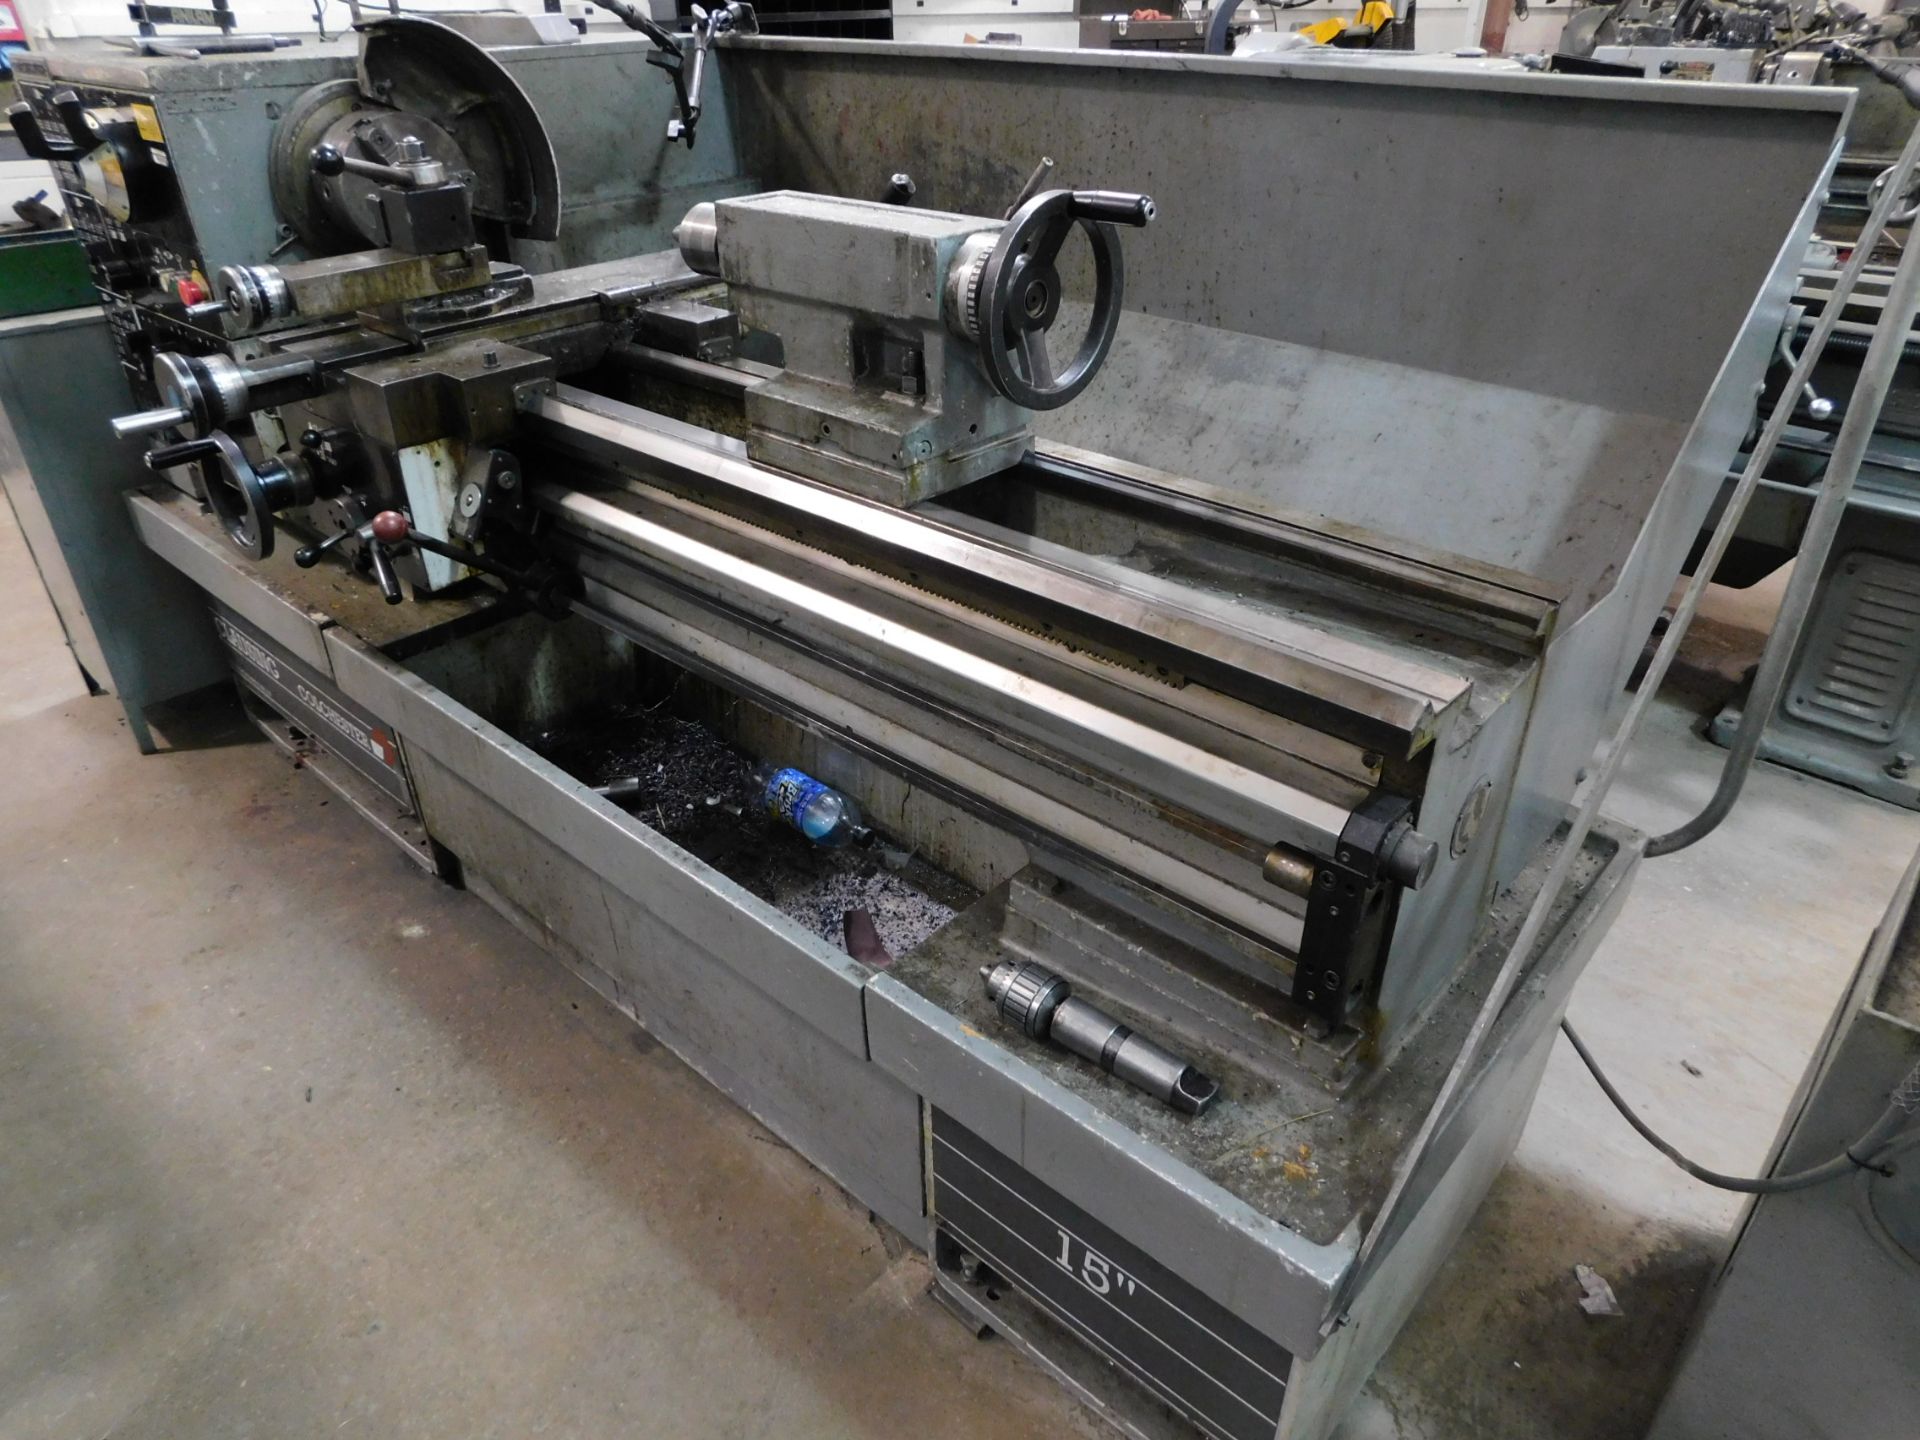 Clausing Colchester 15" x 50" Toolroom Lathe, SN TG0562-490, with Anilam Wizard 211 2-Axis Digital - Image 4 of 12